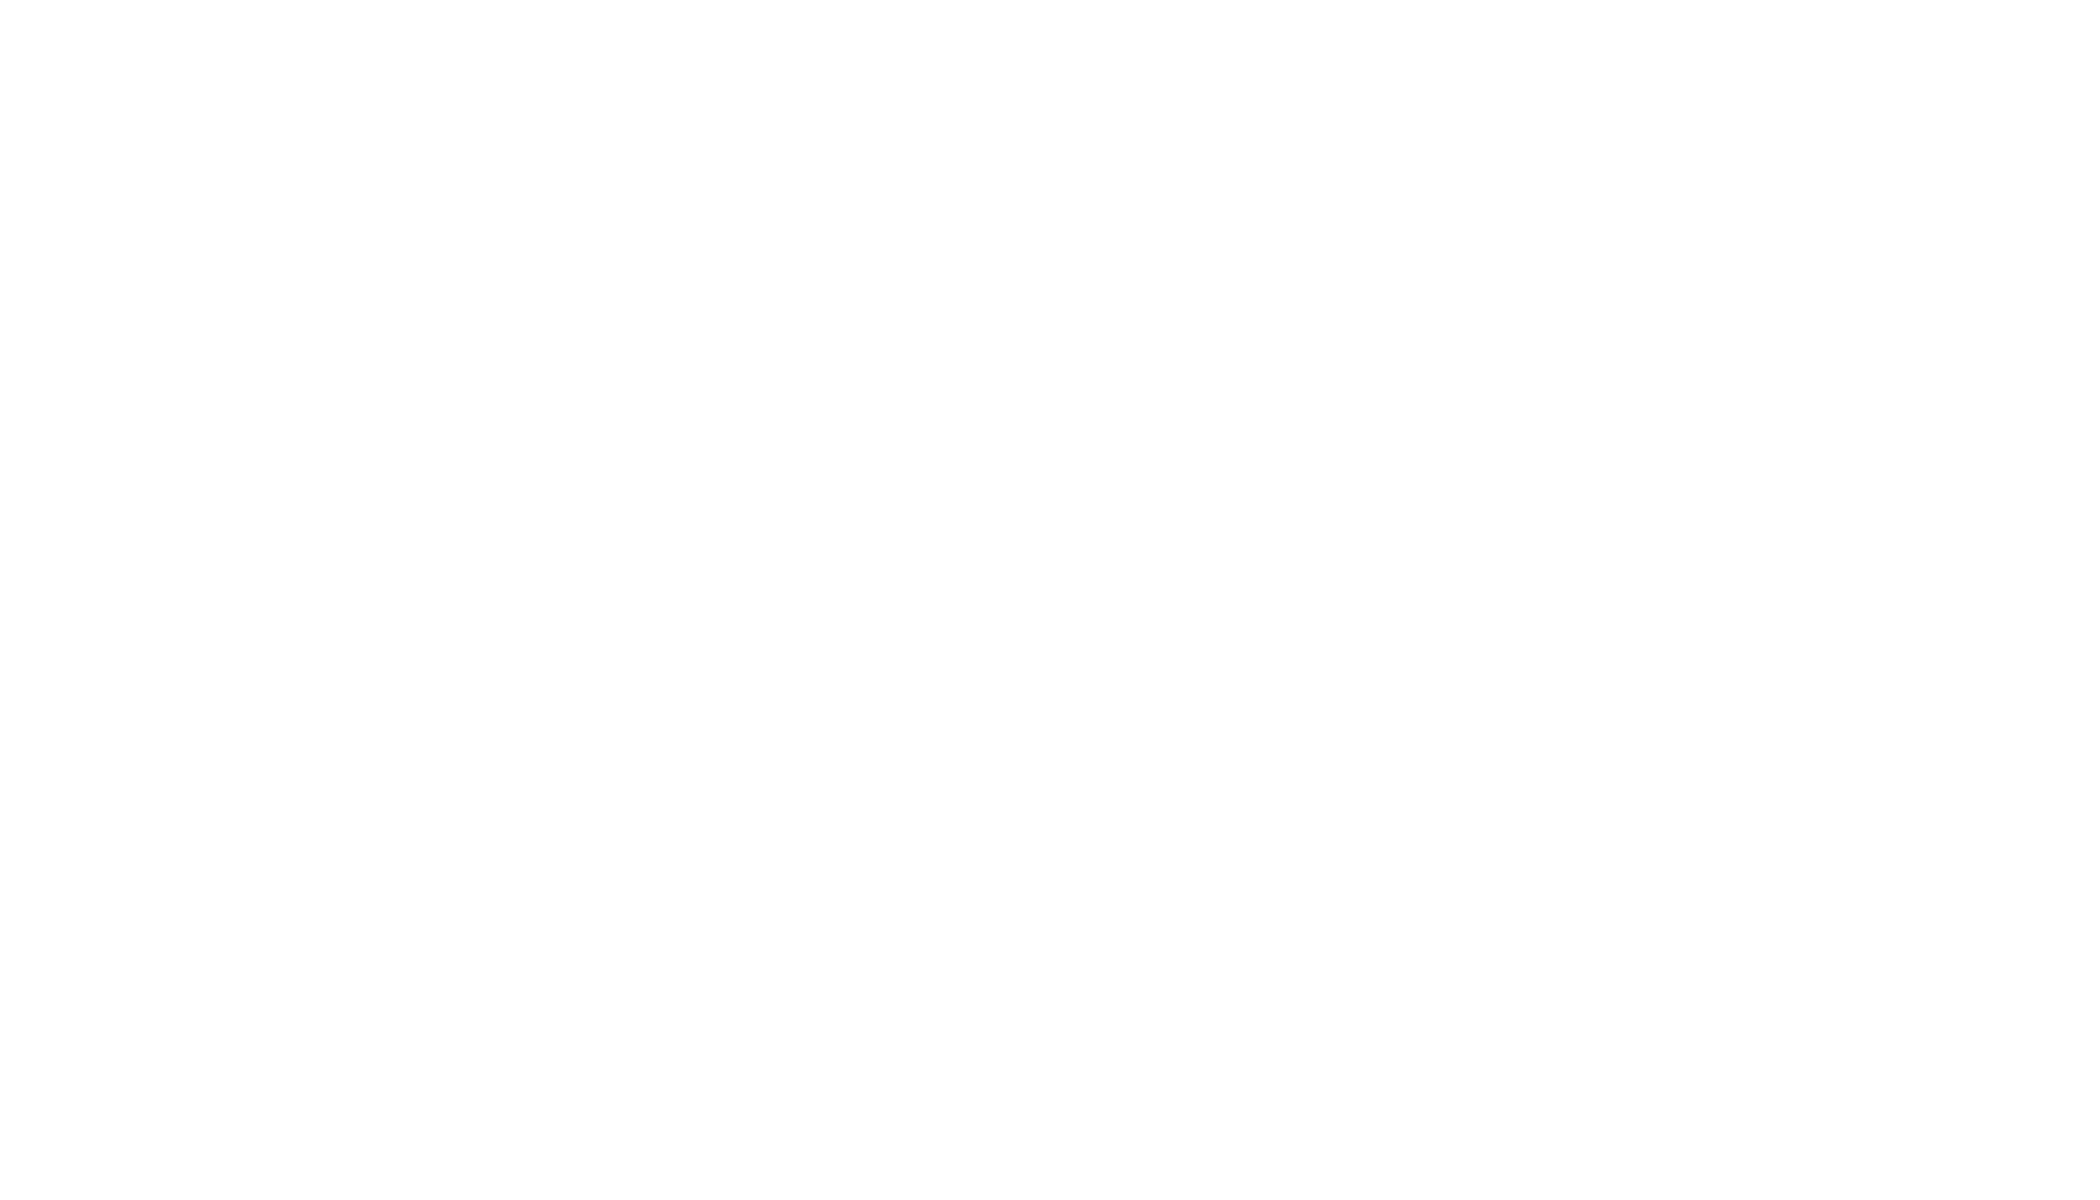 Vacuum Solutions Group